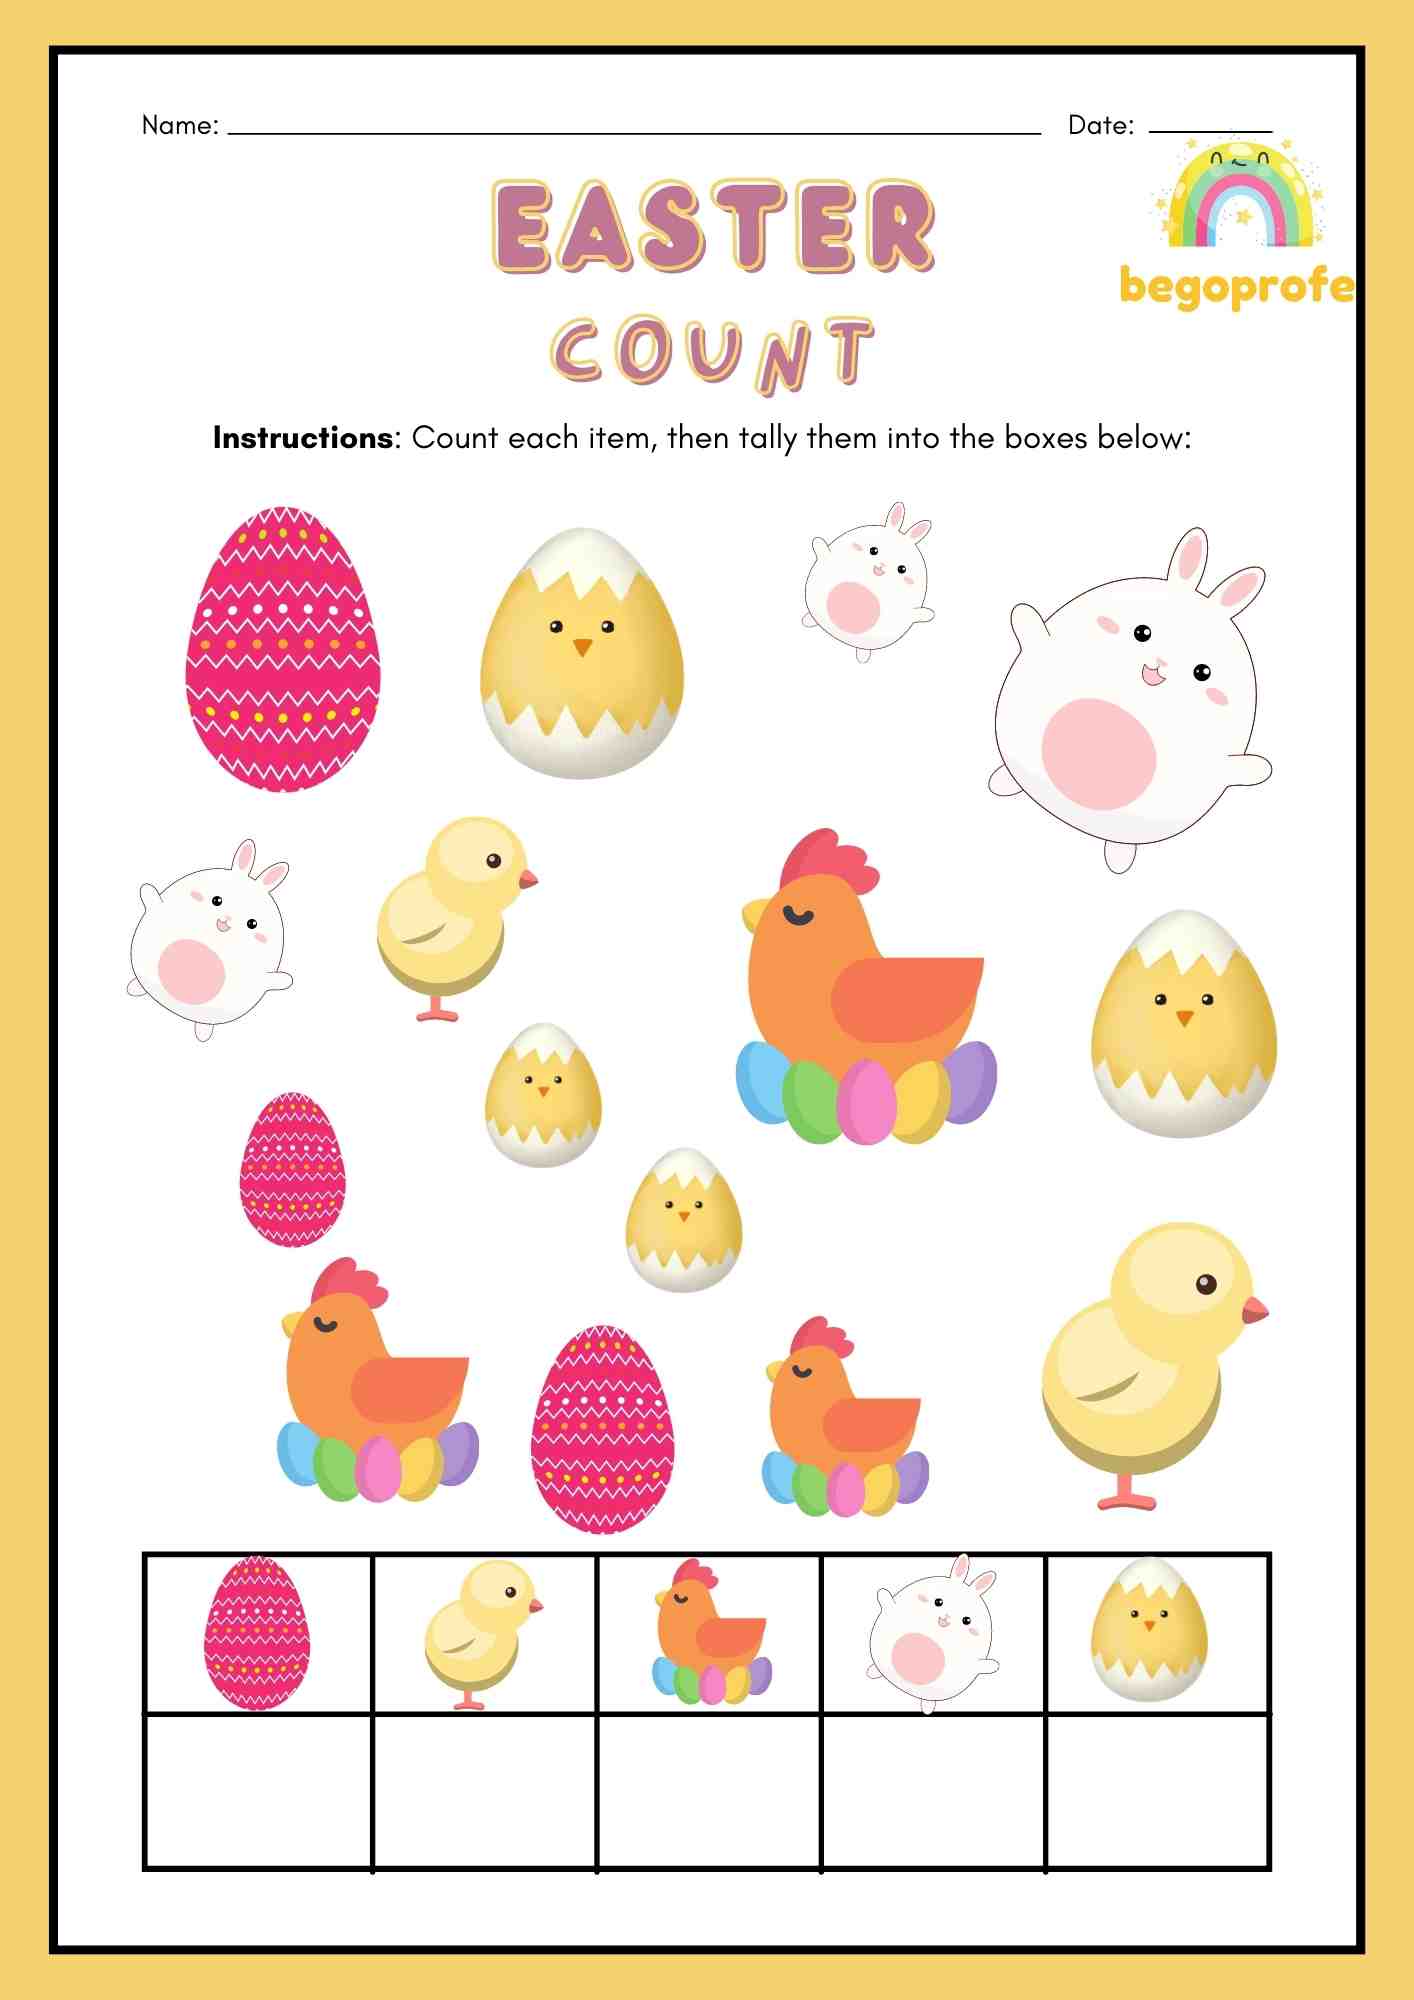 Easter count